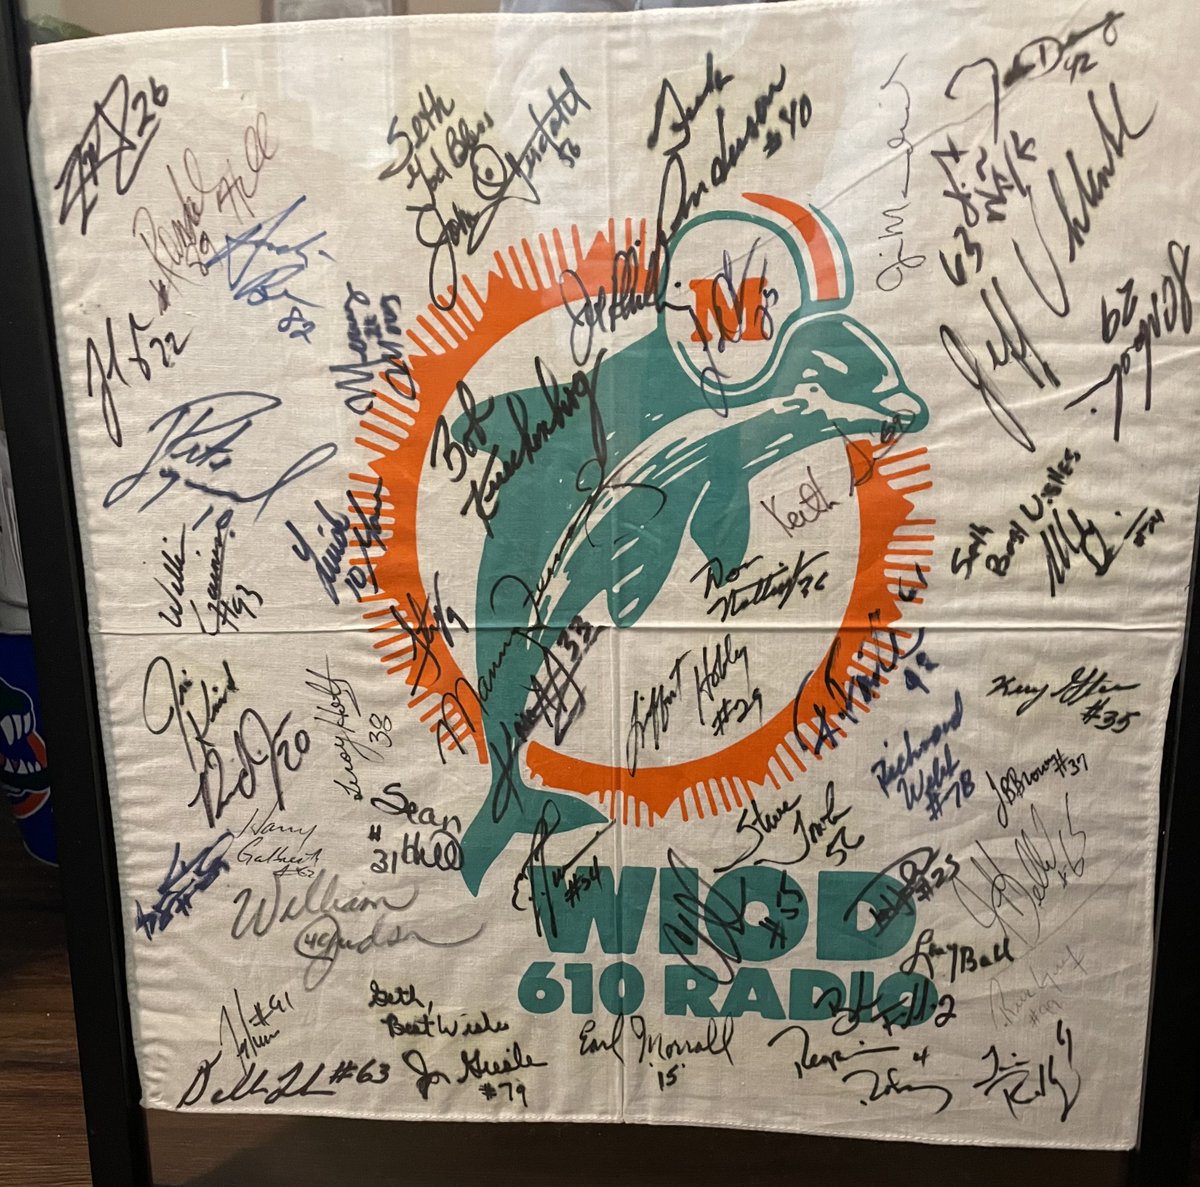 I've been collecting random Dolphin signatures for years on this WIOD hankie and I am just about out of room. Do I start a new one or keep adding them to this one?